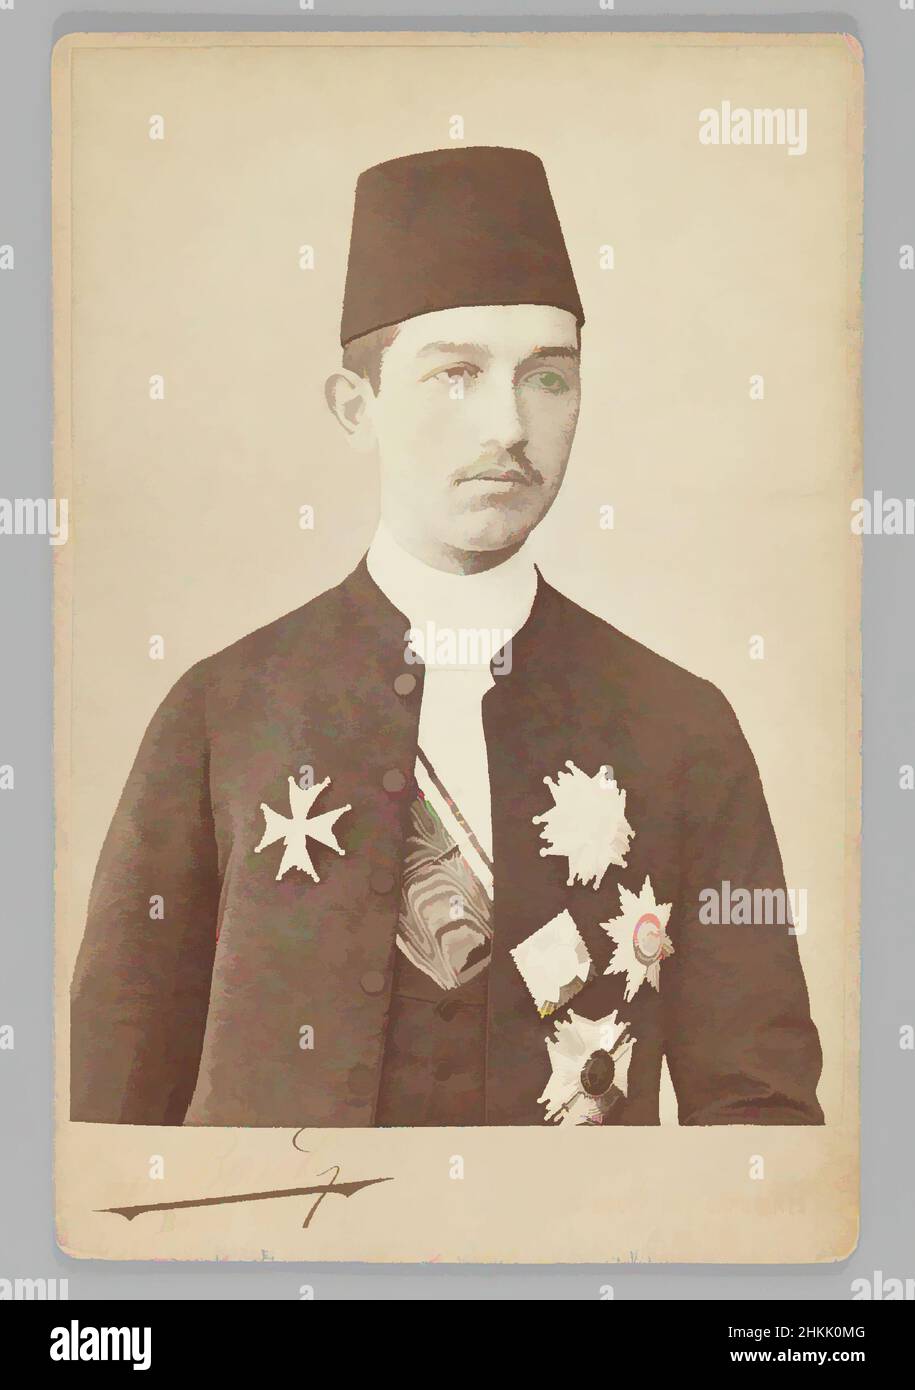 Art inspired by One of 274 Vintage Photographs, Albumen silver photograph, late 19th-early 20th century, Qajar, Qajar Period, Photo: 5 11/16 x 4 1/16 in., 14.4 x 10.3 cm;, carte de visite, fez, military, Paris, Persian, uniform, Classic works modernized by Artotop with a splash of modernity. Shapes, color and value, eye-catching visual impact on art. Emotions through freedom of artworks in a contemporary way. A timeless message pursuing a wildly creative new direction. Artists turning to the digital medium and creating the Artotop NFT Stock Photo